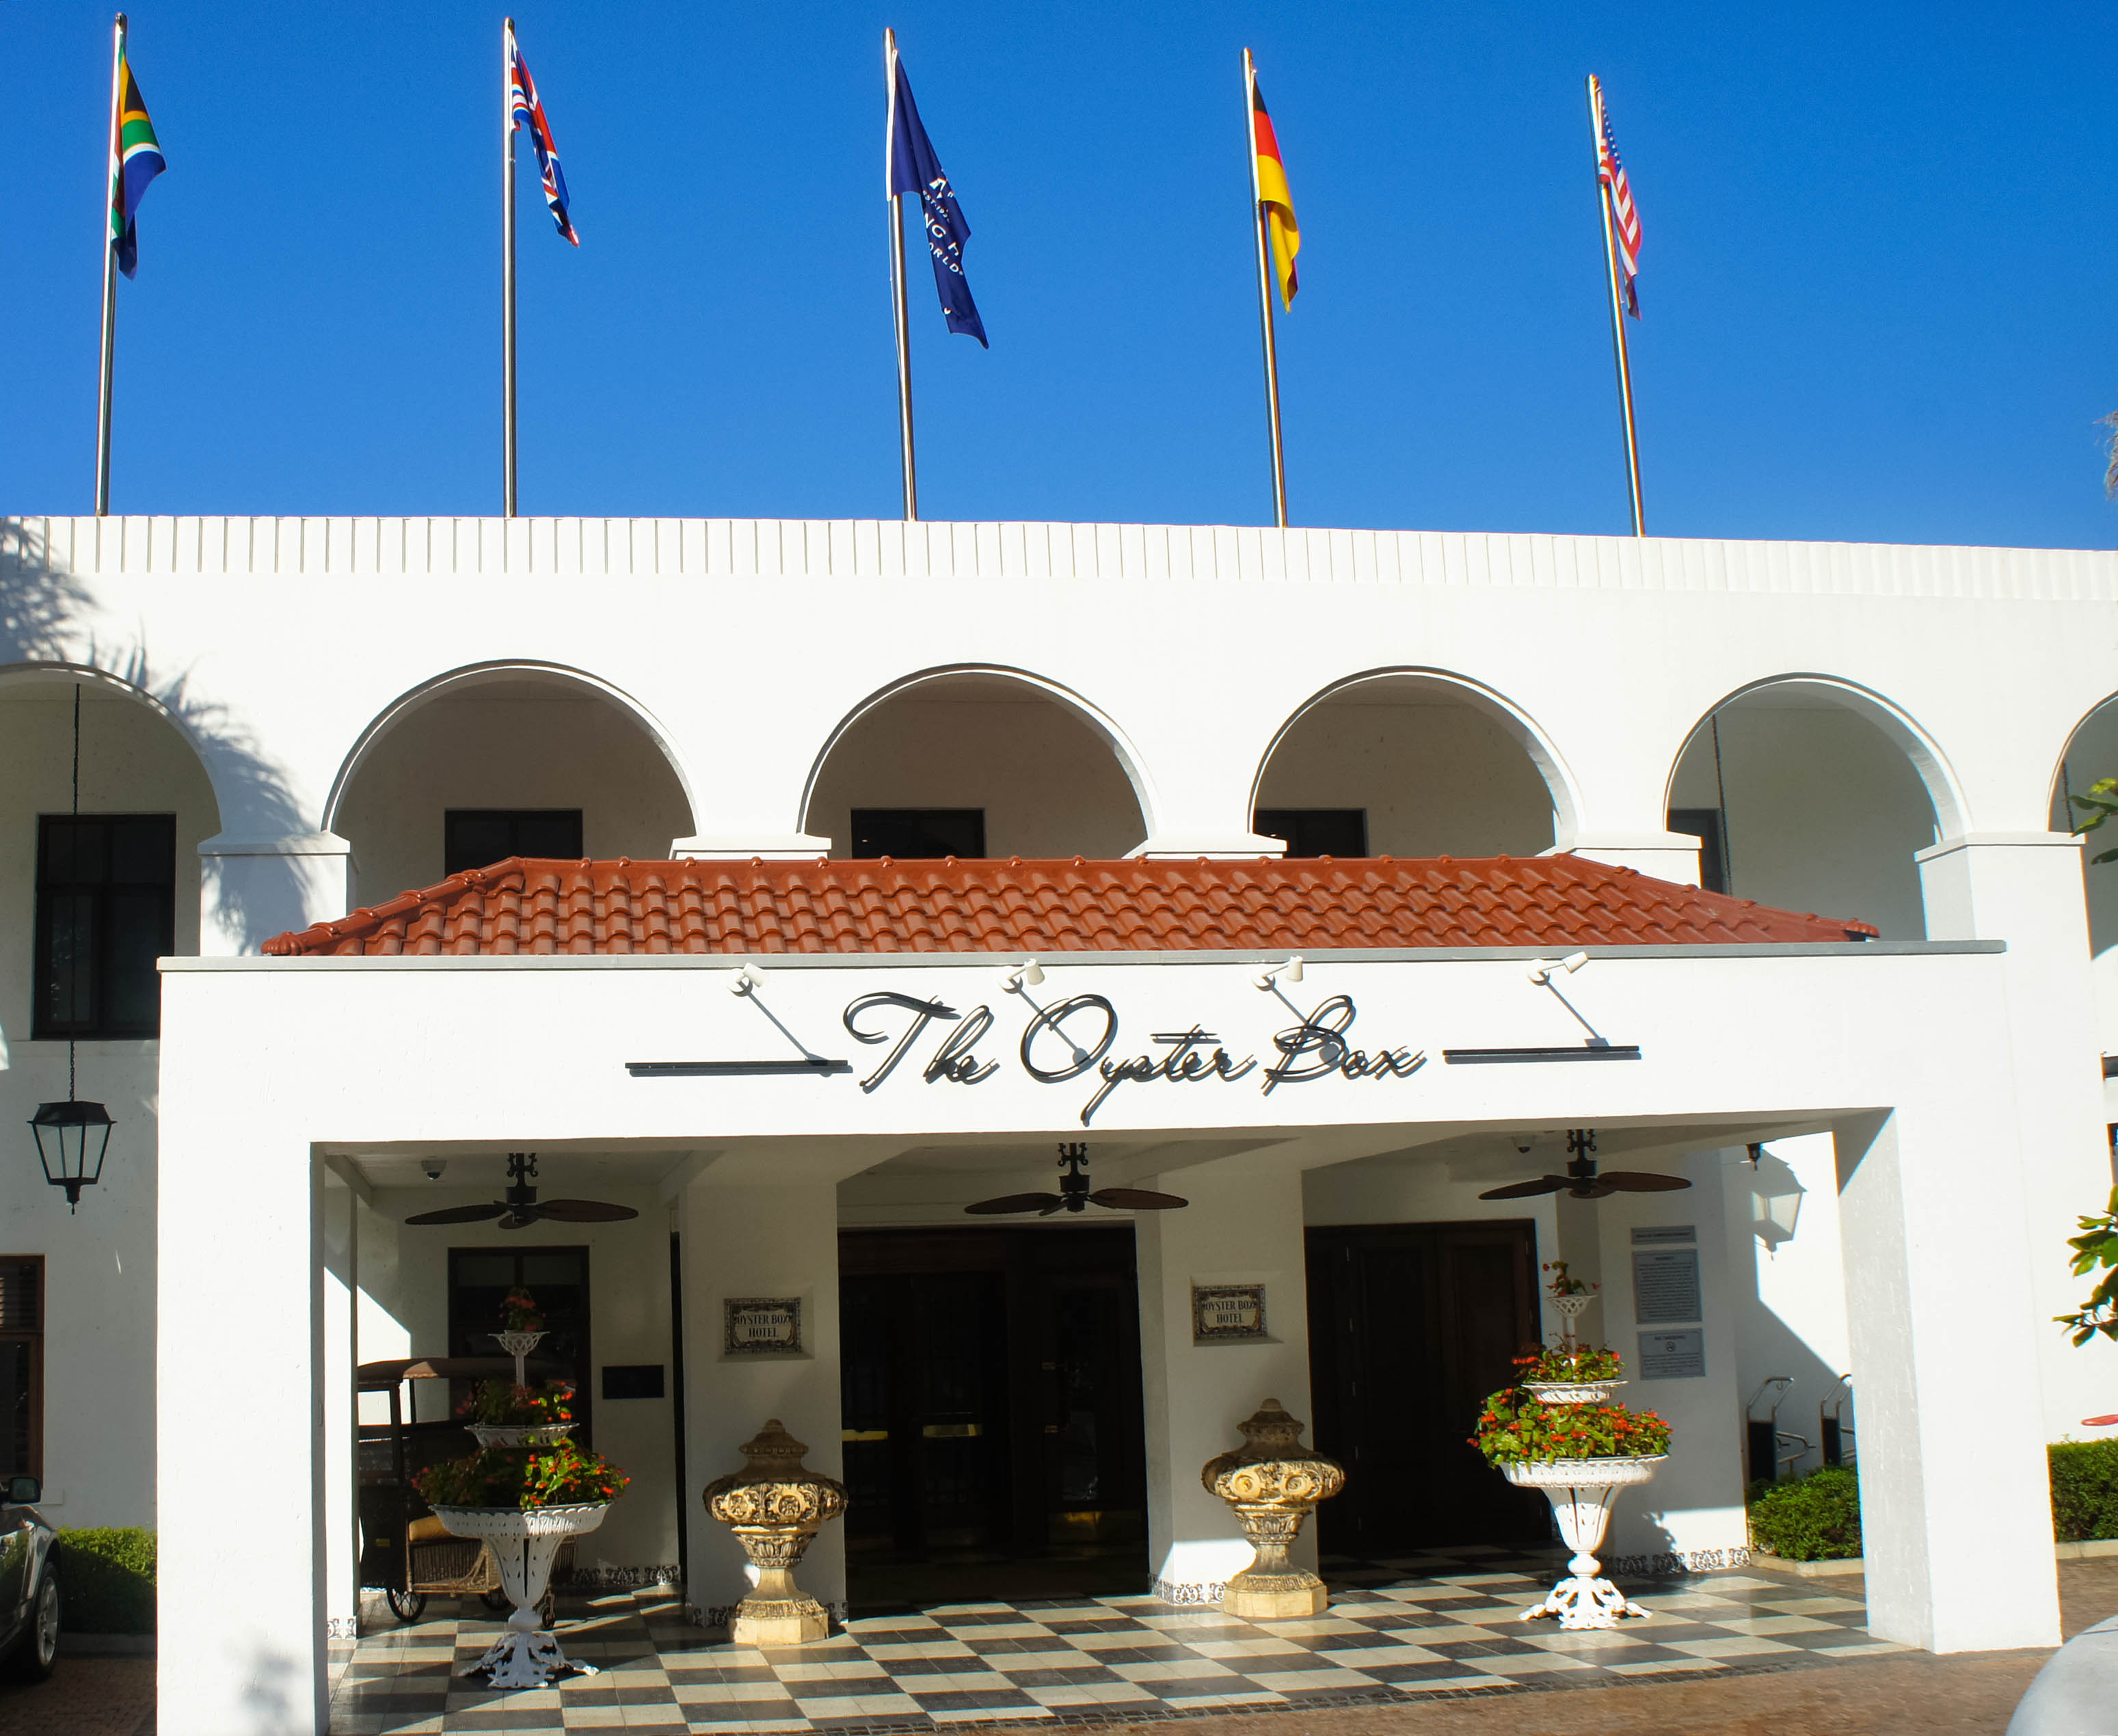 My Travelution - Travel Club - The Oyster Box Hotel